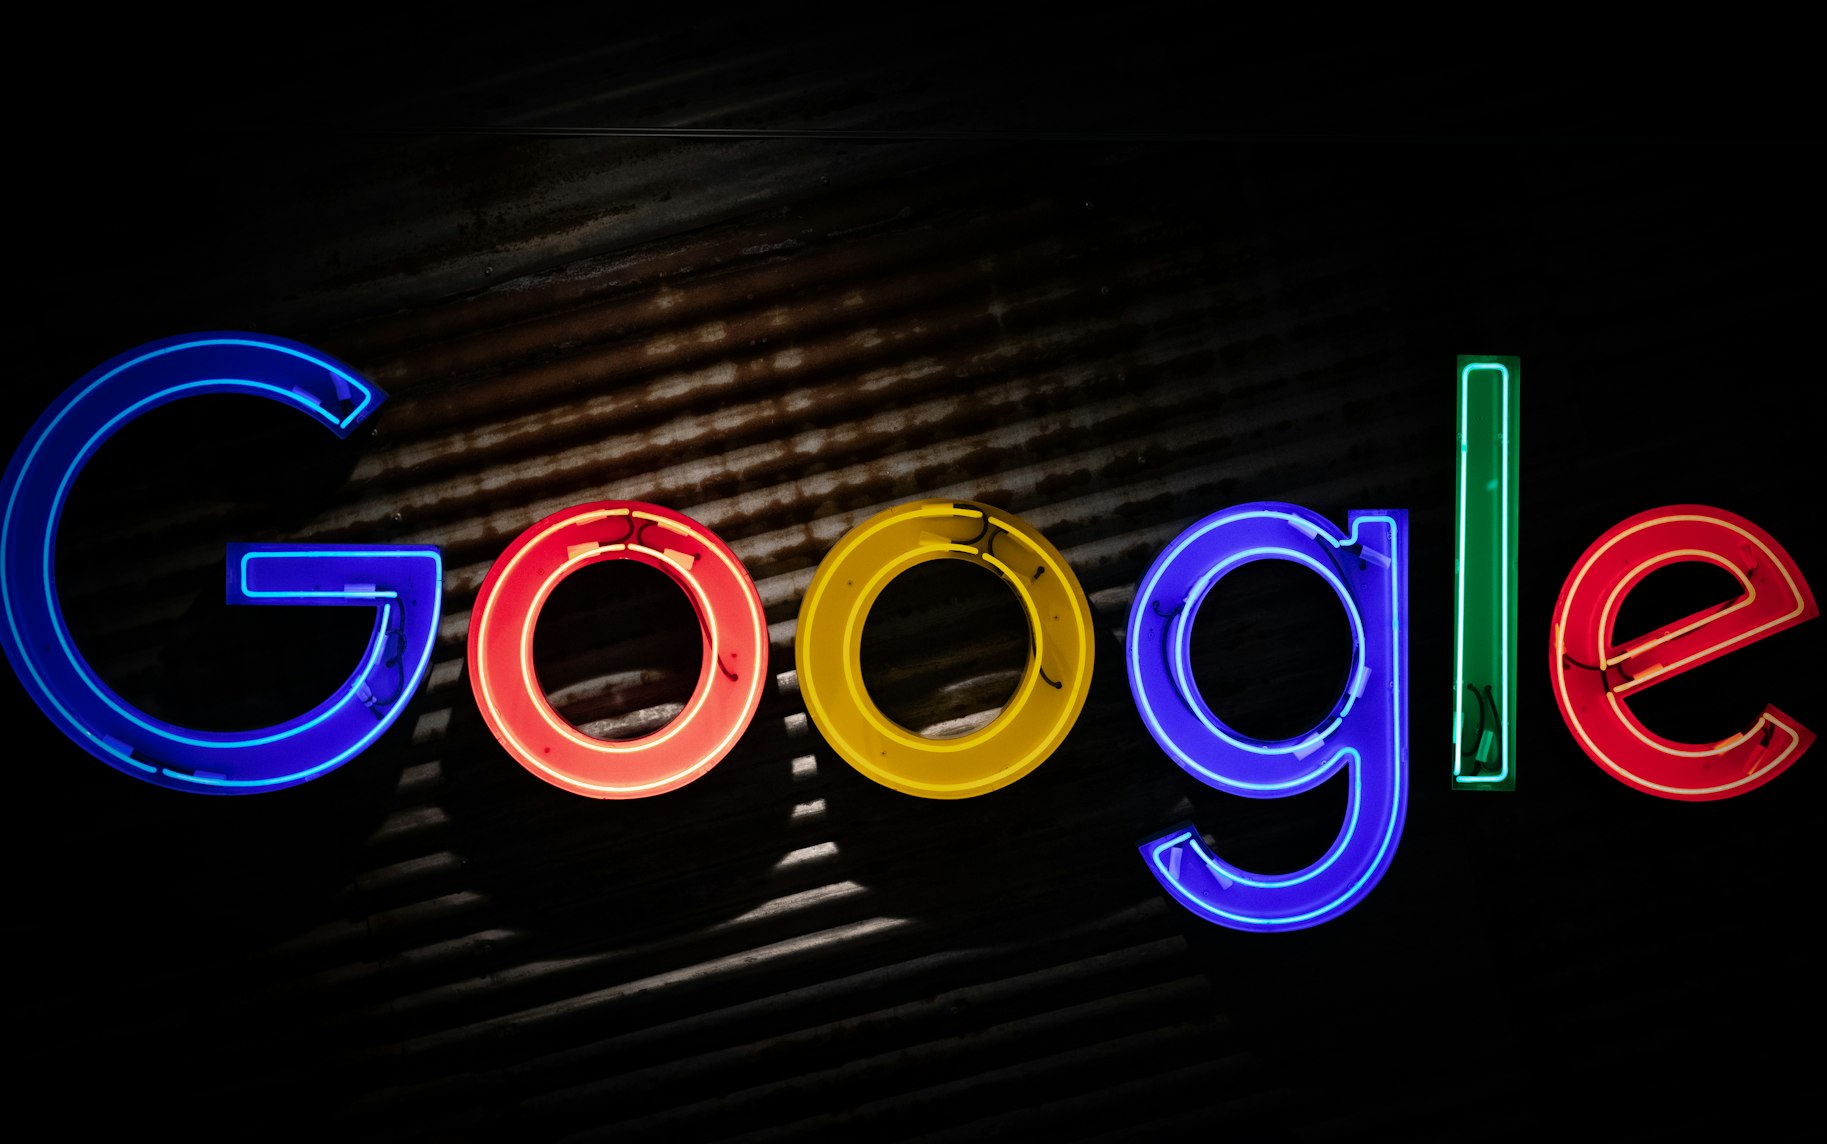 Google Tests Watermarks to Identify AI Images